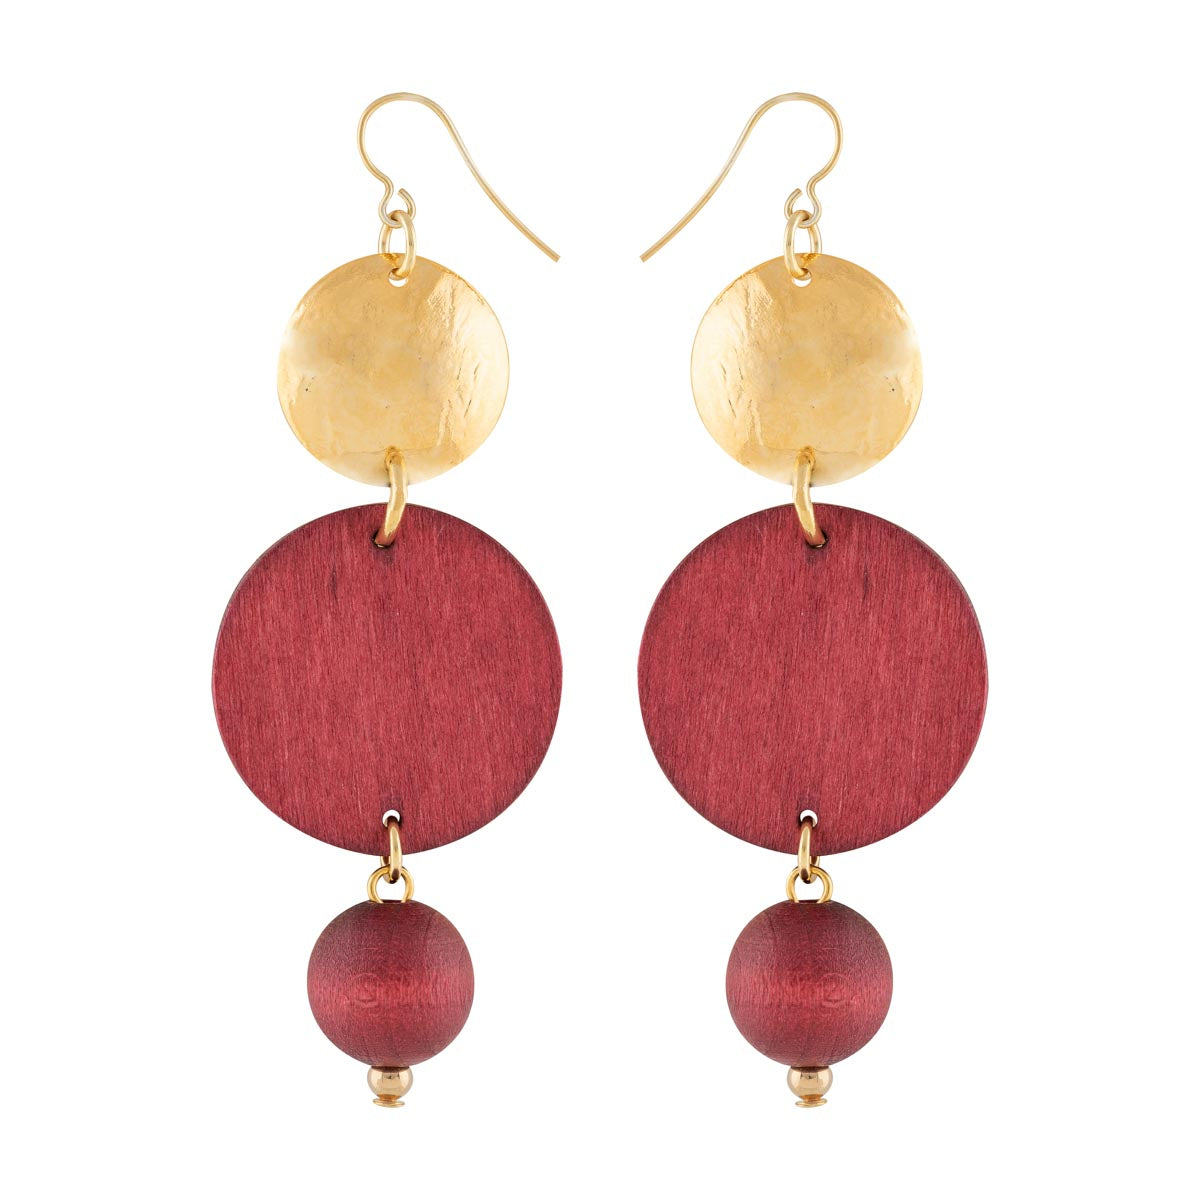 Ilta earrings, wine red and gold